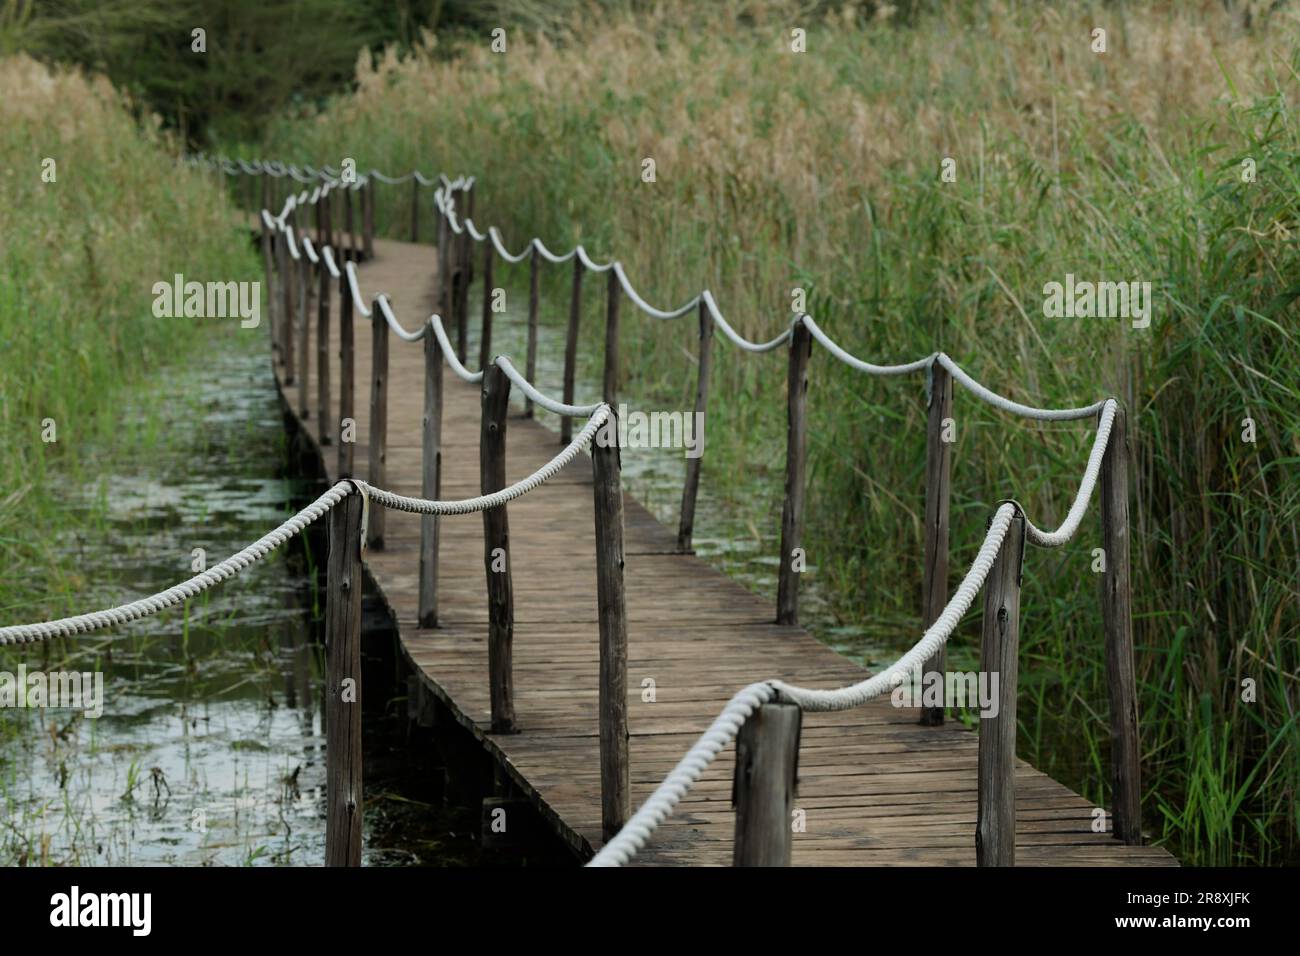 Beauty in nature, wooden walkway in nature park, outdoor slow travel, Mkhuse, South Africa, broadwalk in swamp reeds, minimal landscape concept Stock Photo